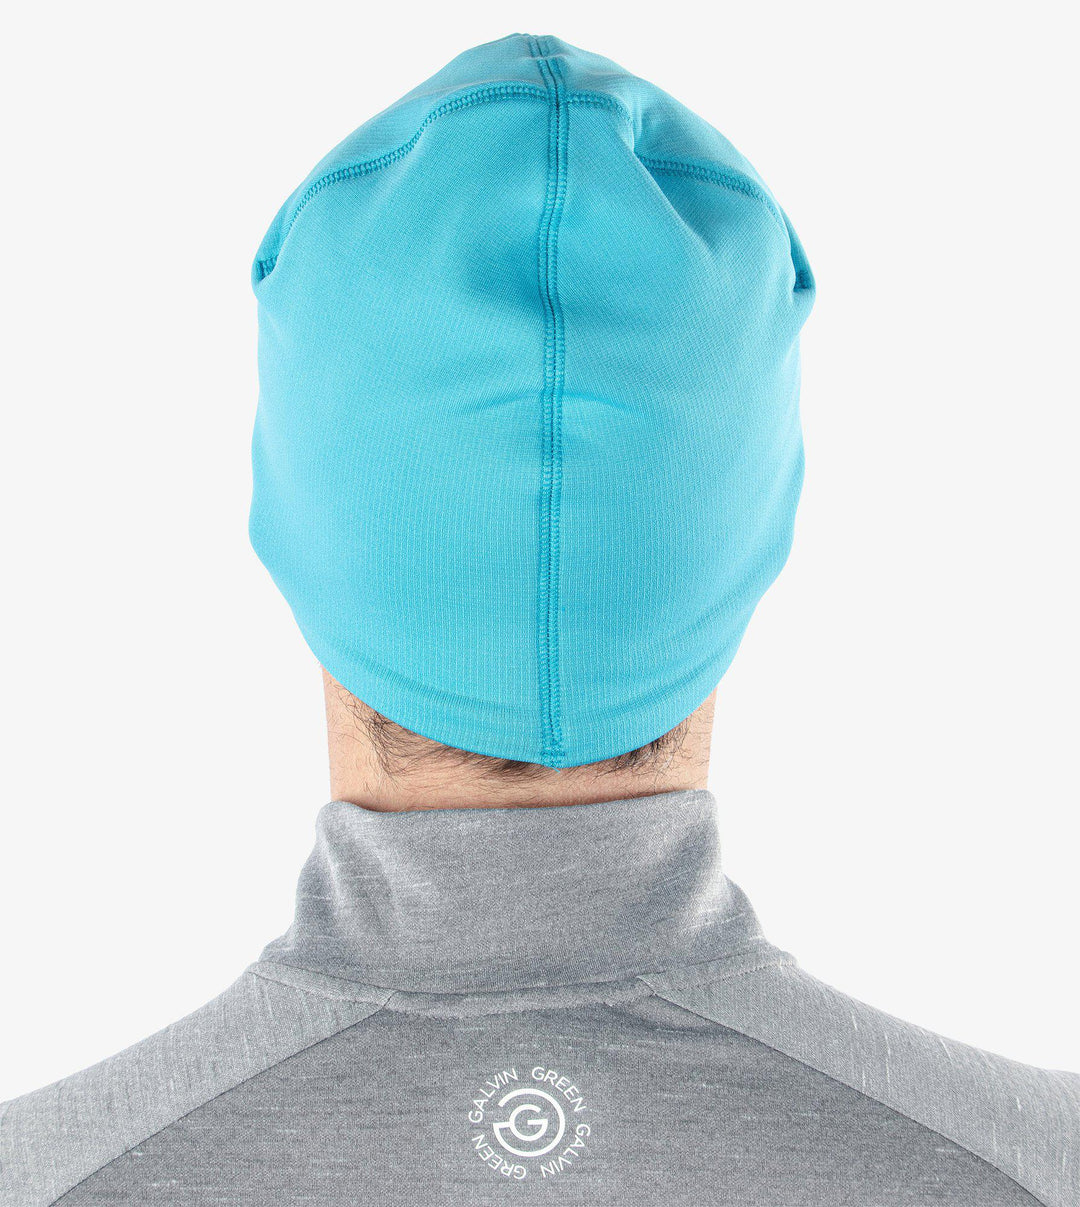 Denver is a Insulating golf hat in the color Aqua(4)